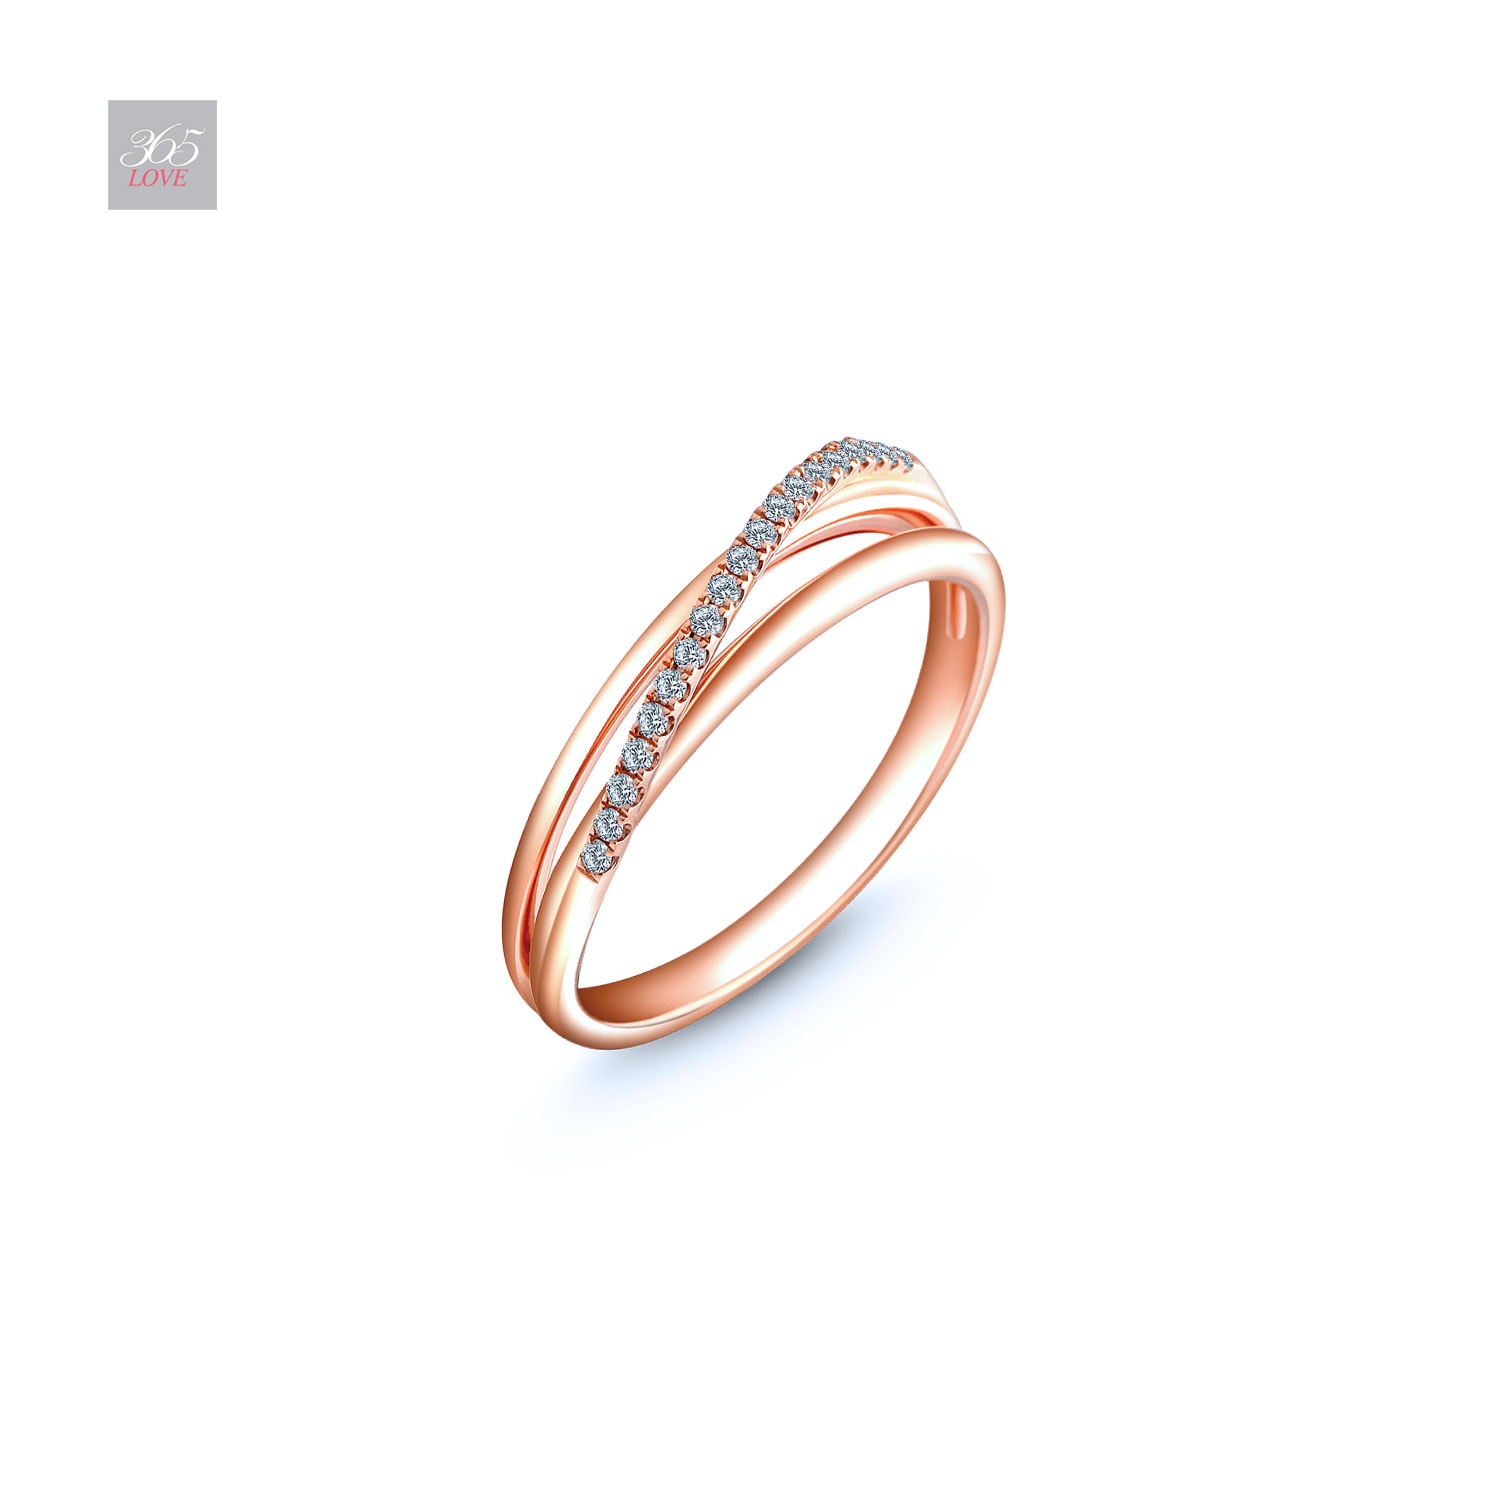 Criss Cross Ring in 18K Gold with Diamonds